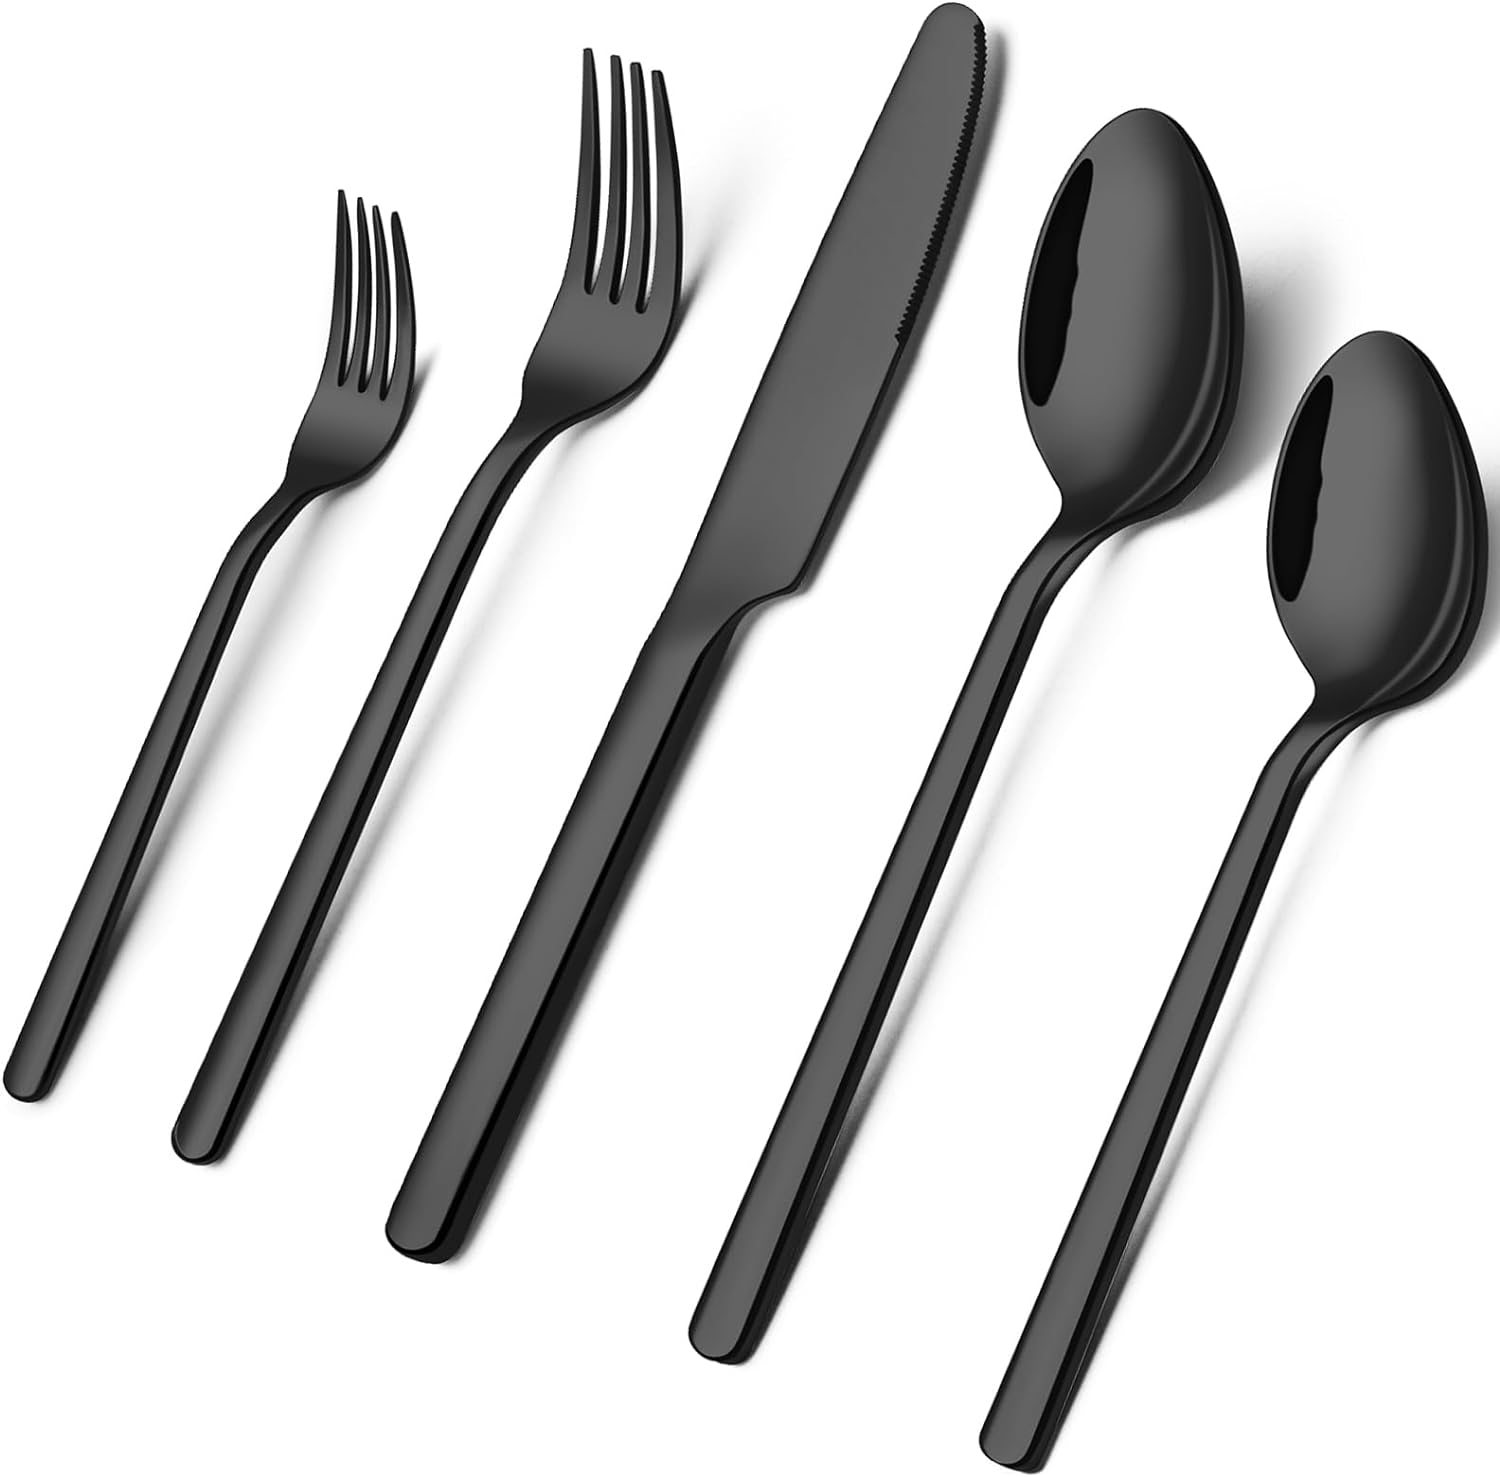 Black Silverware Set, 20 PCs Black Flatware Set for 4, 18/10 Stainless steel Cutlery Set for Home Kitchen and Restaurant(Black, 20 pieces for 4)